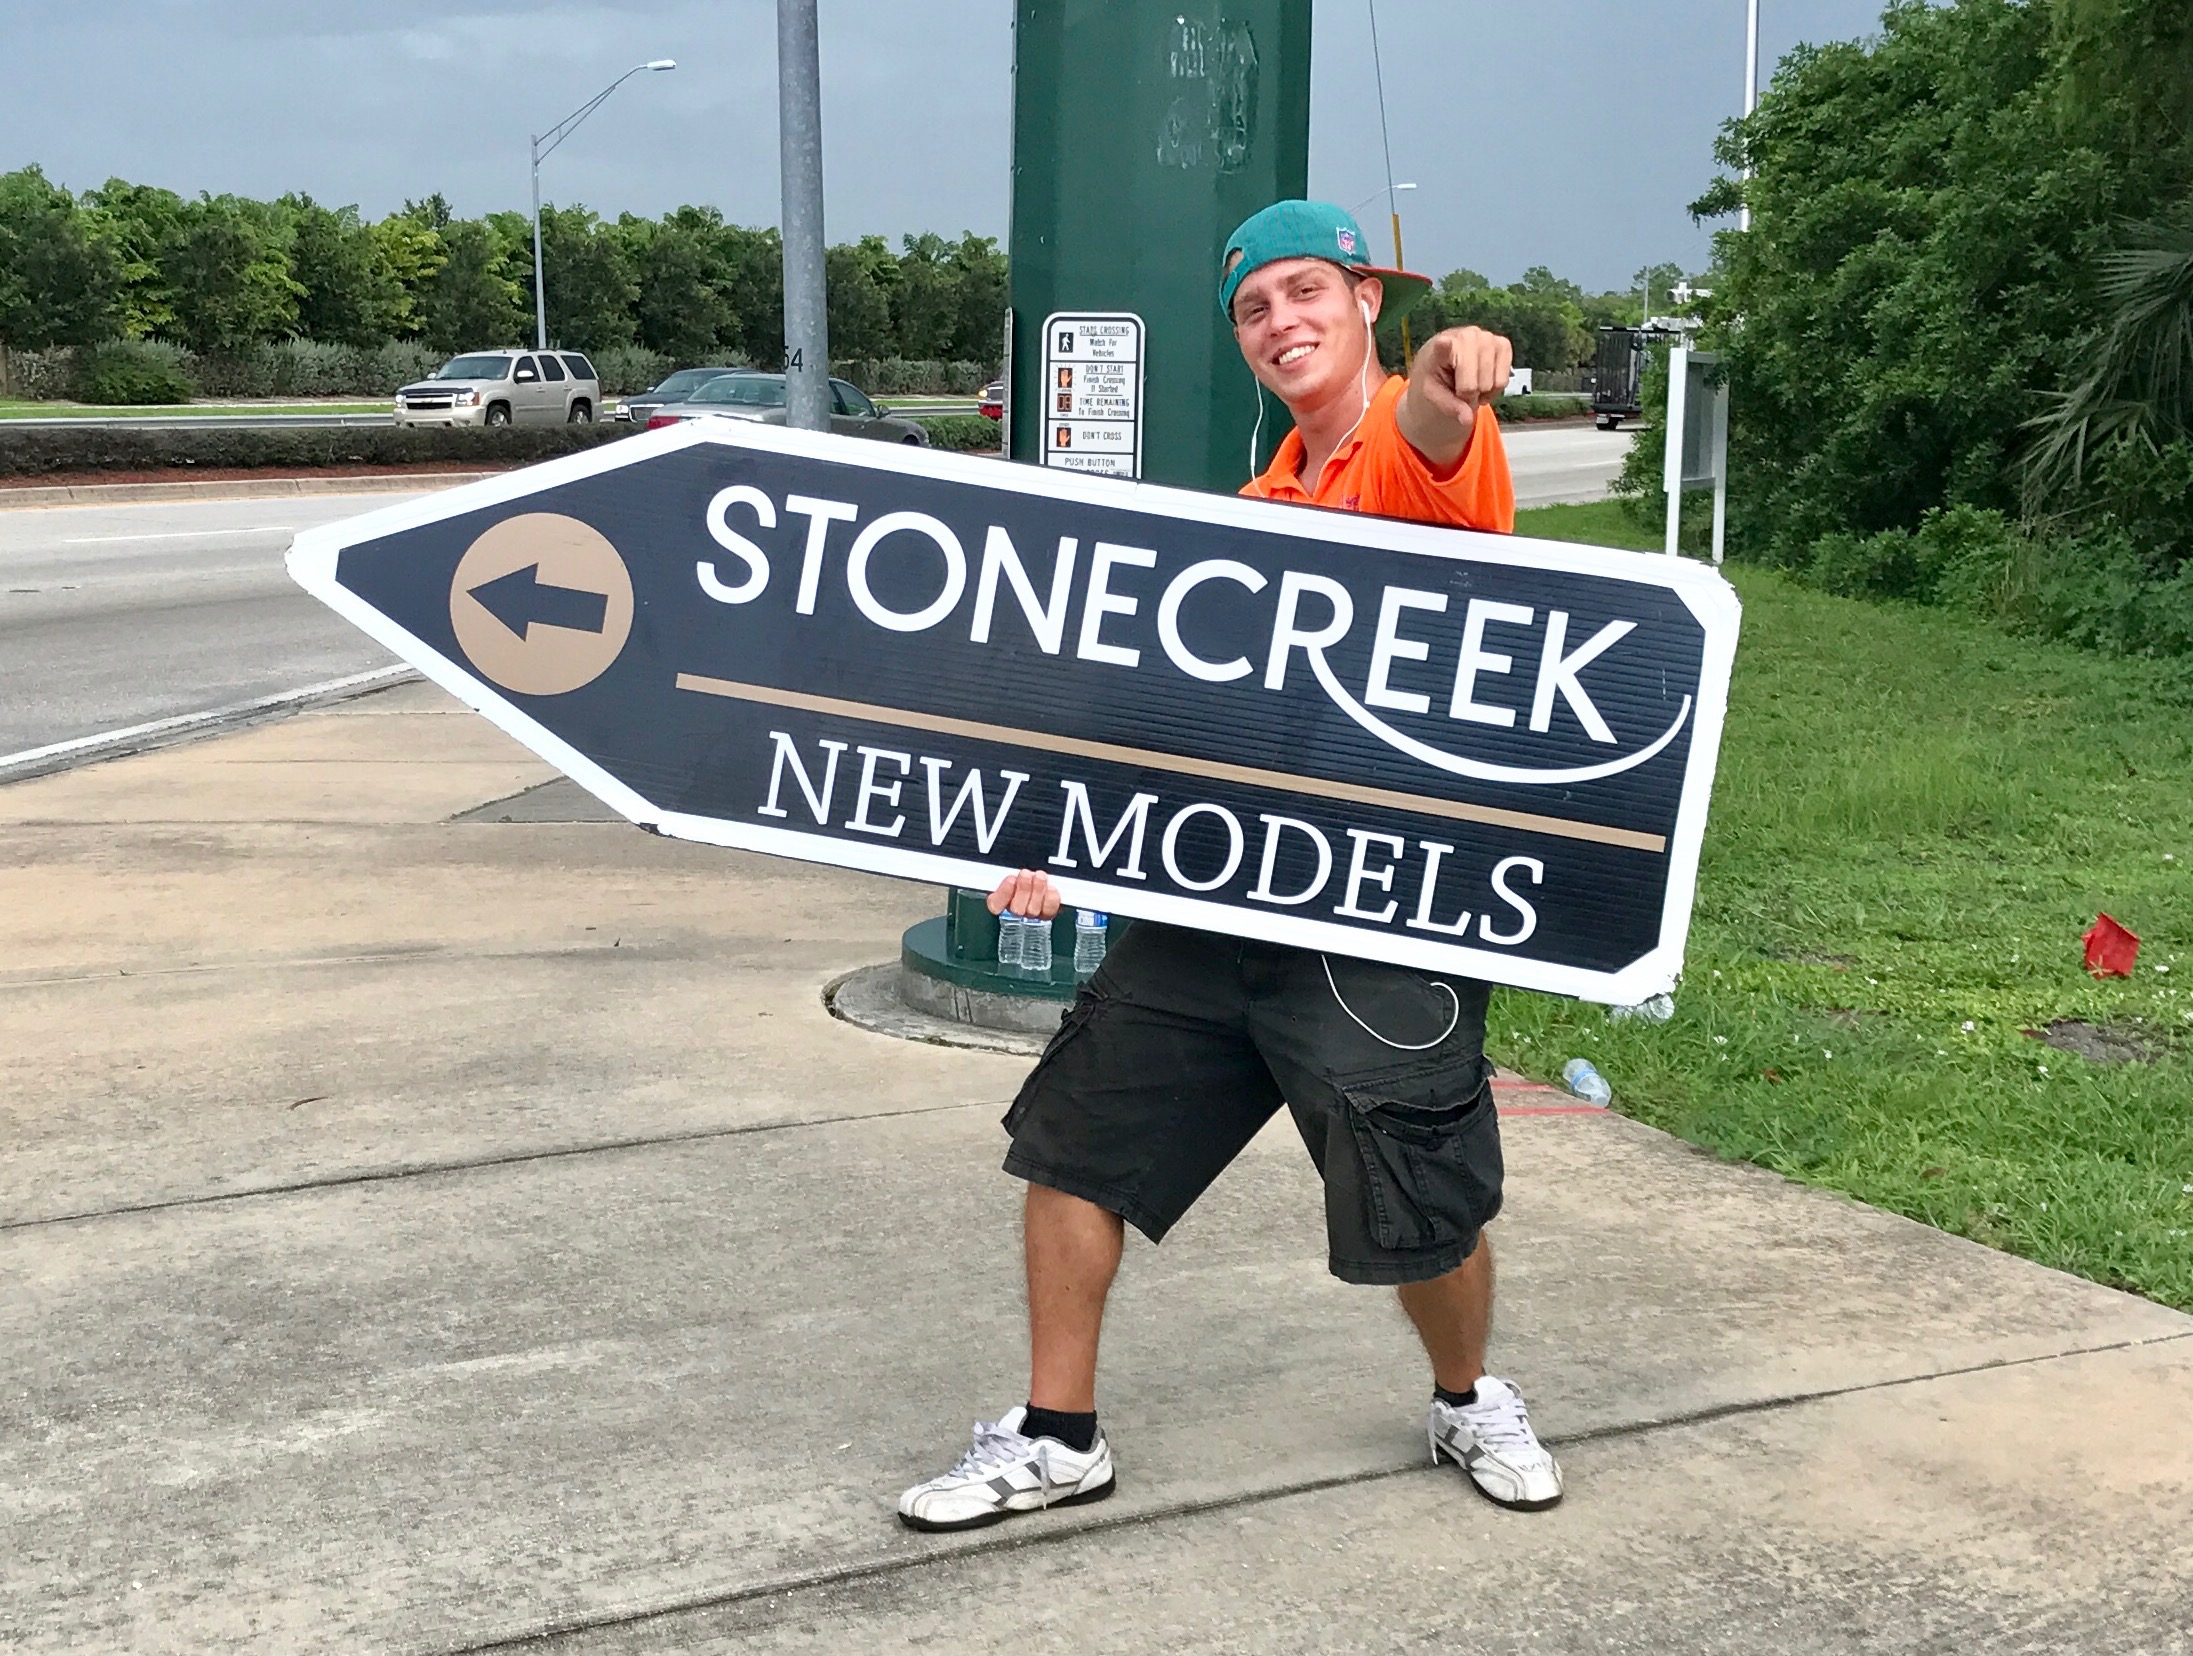 Sign Spinners in Fort Myers, Naples and Cape Coral